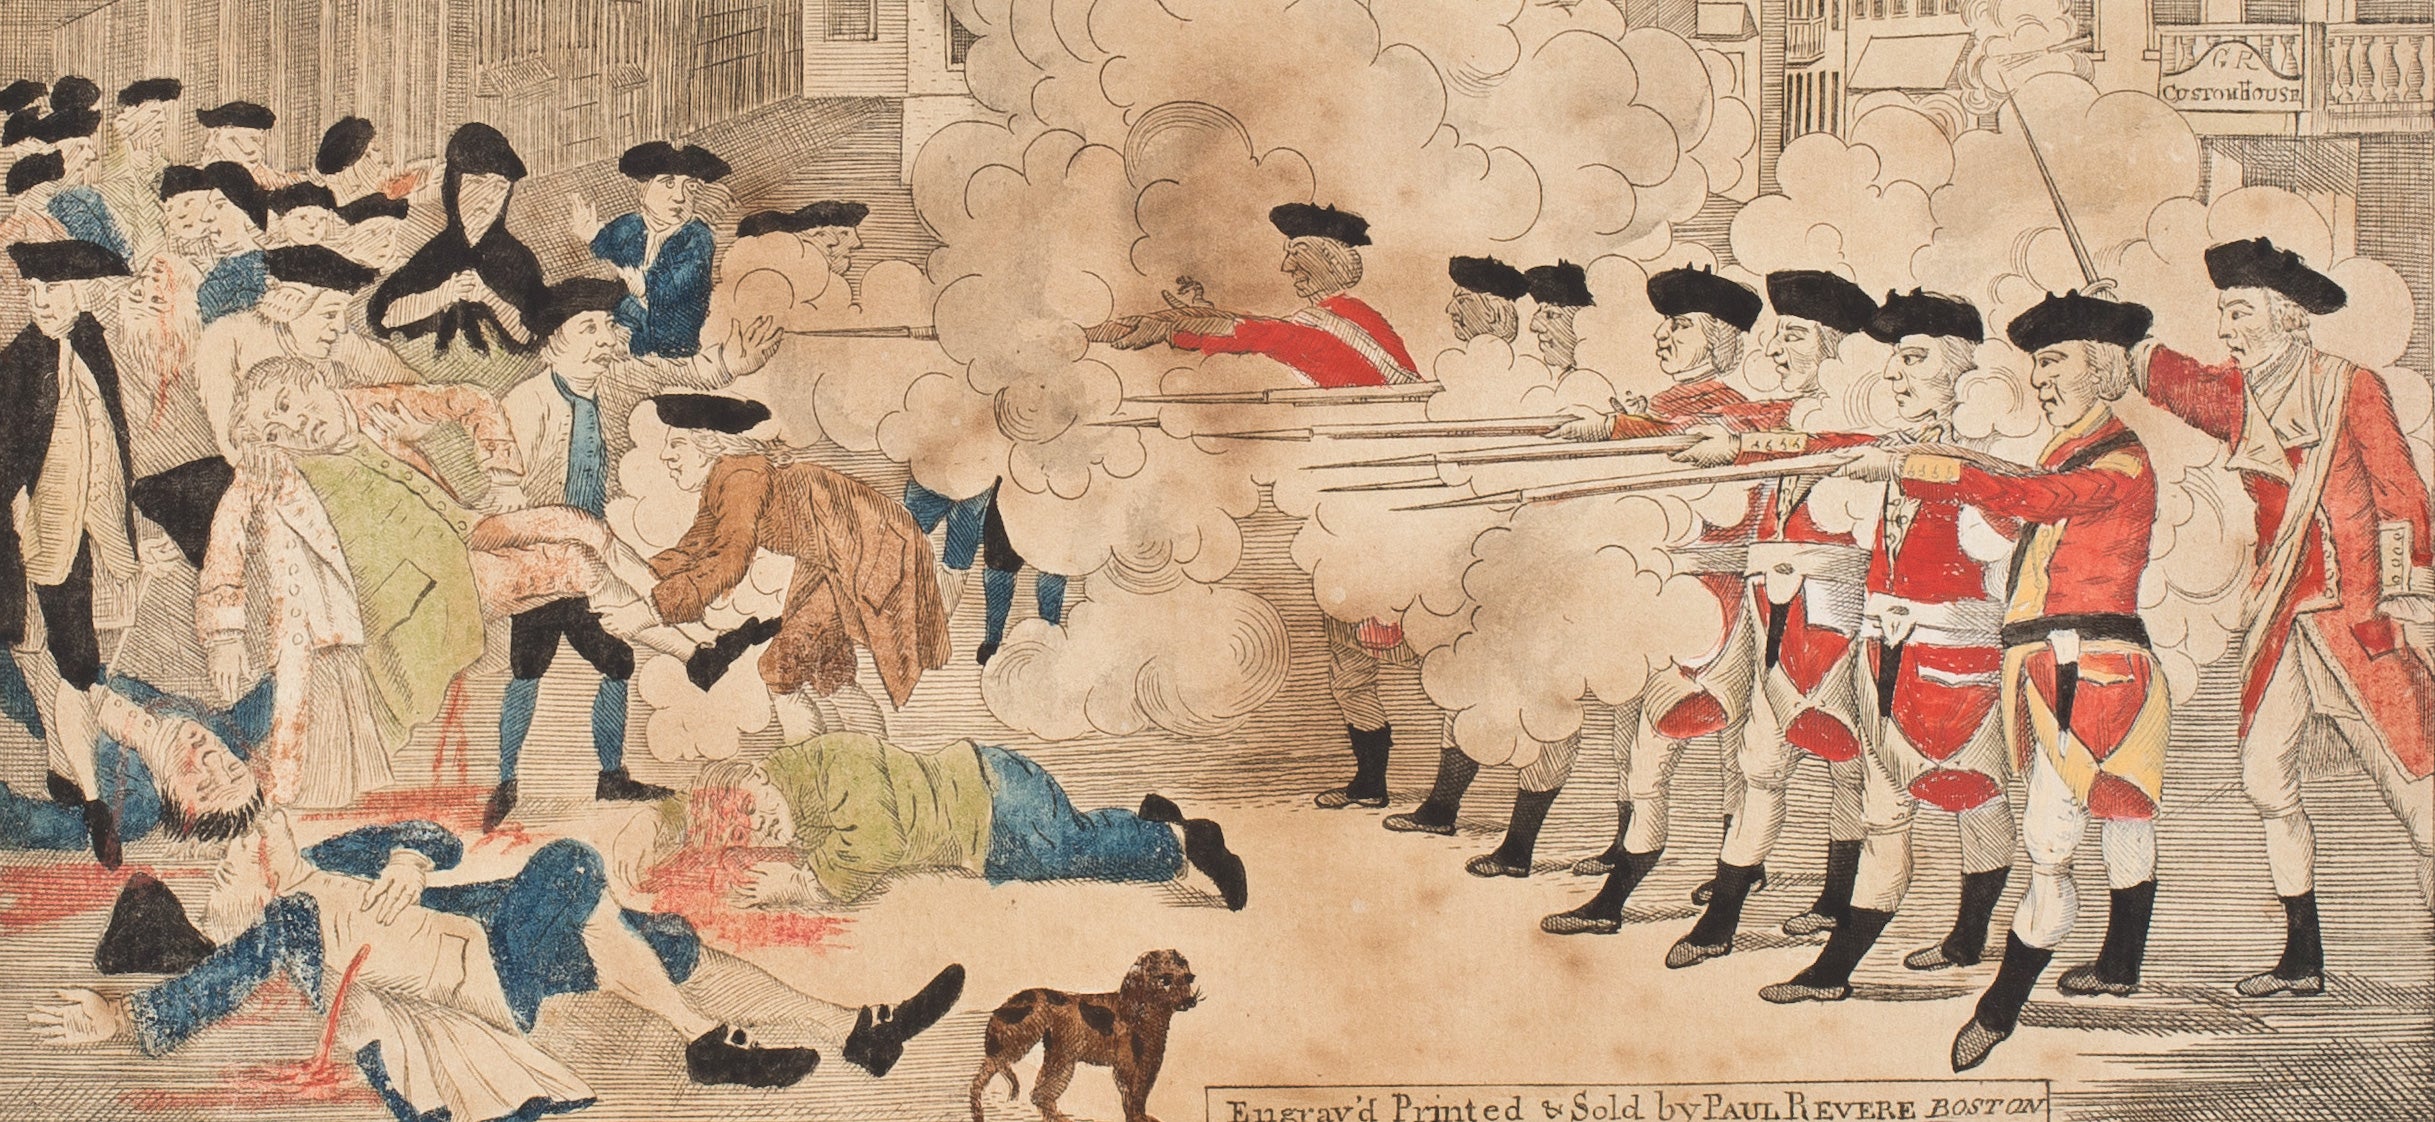 A graphic depiction of the death of Crispus Attucks in the Boston Massacre, done in an engraving by Paul Revere